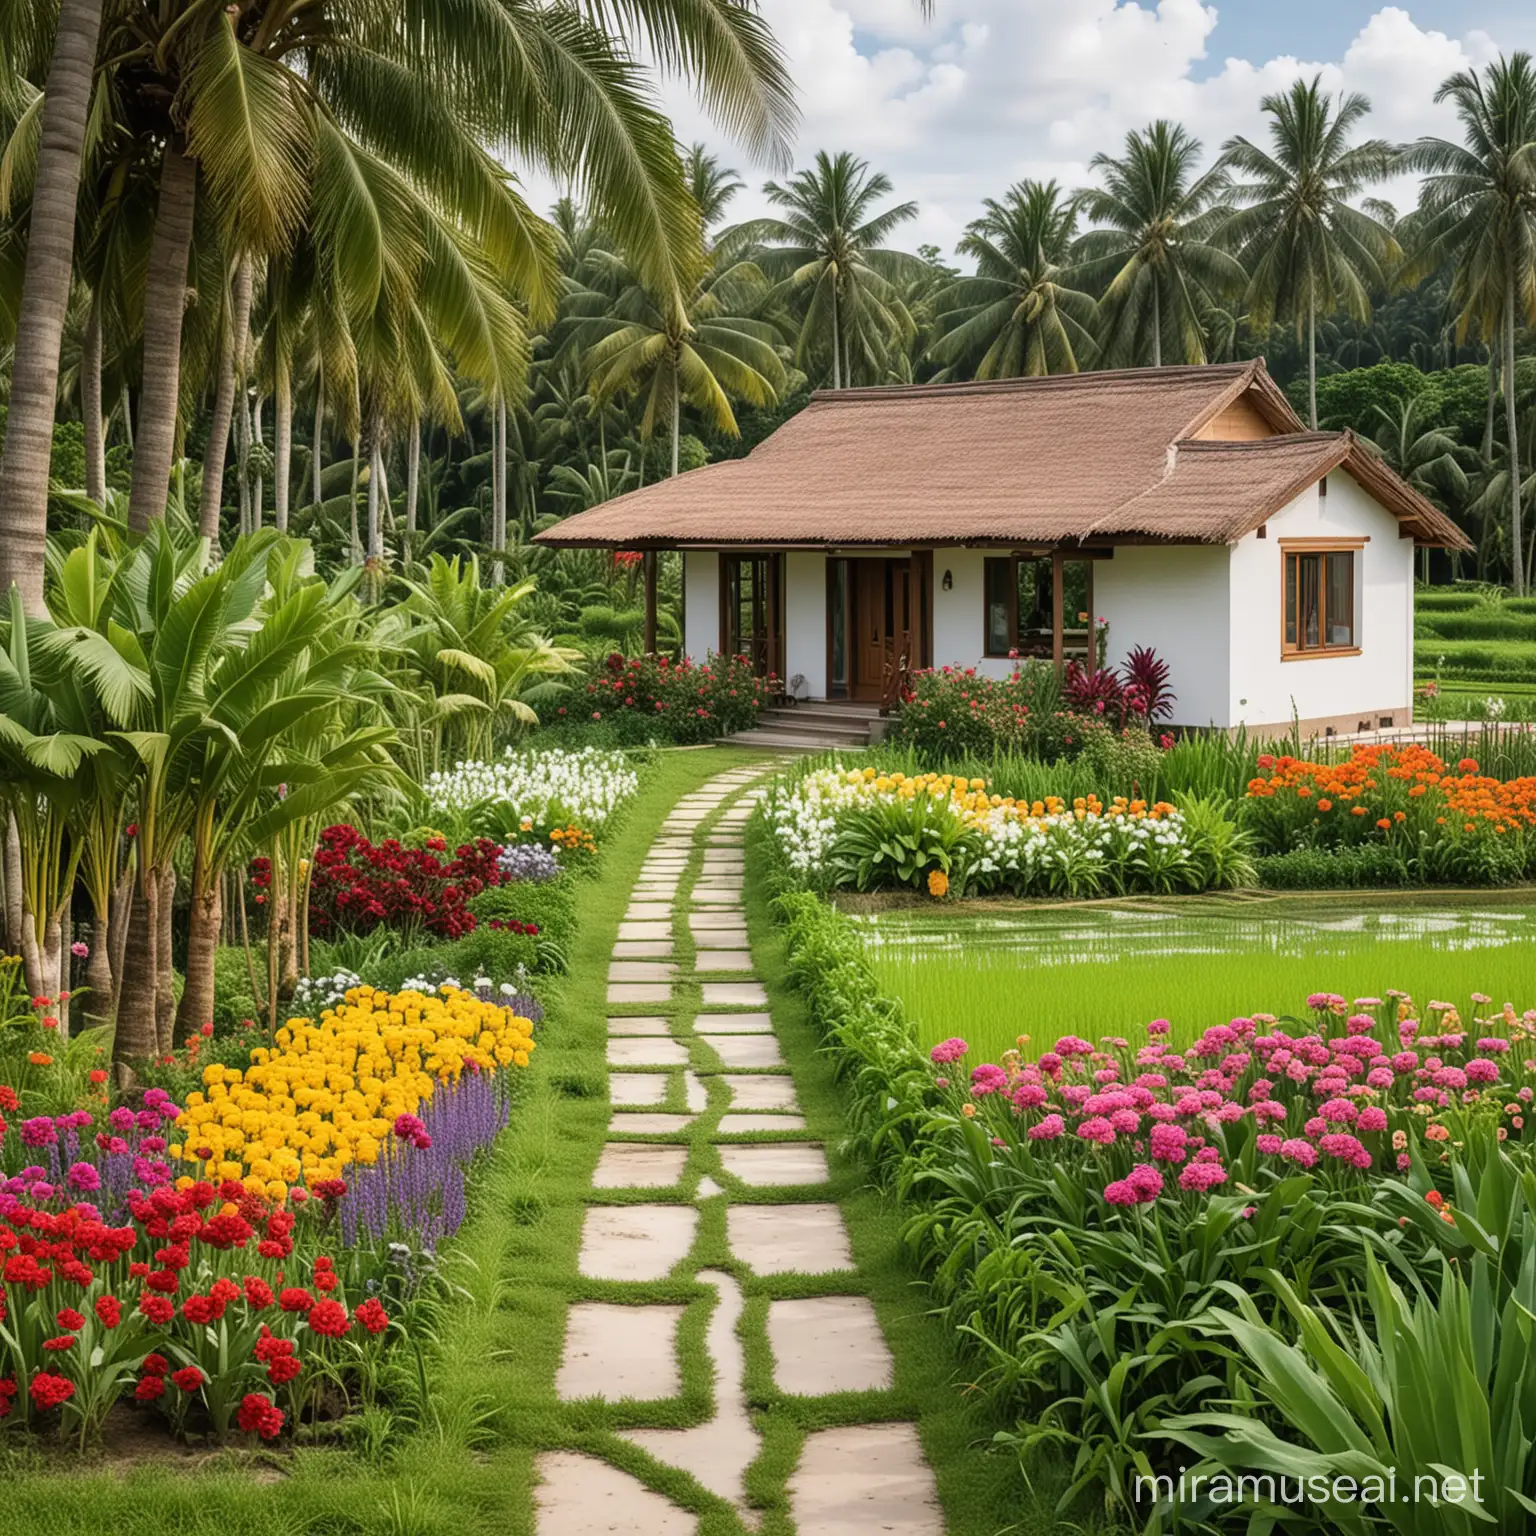 A cute modern house surrounded by garden of vegetables and colorful flowers, rice fields and coconut plantation. Garden of vegetables and flowers should be in the front yard. Rice fields and coconut plantation in the backyard